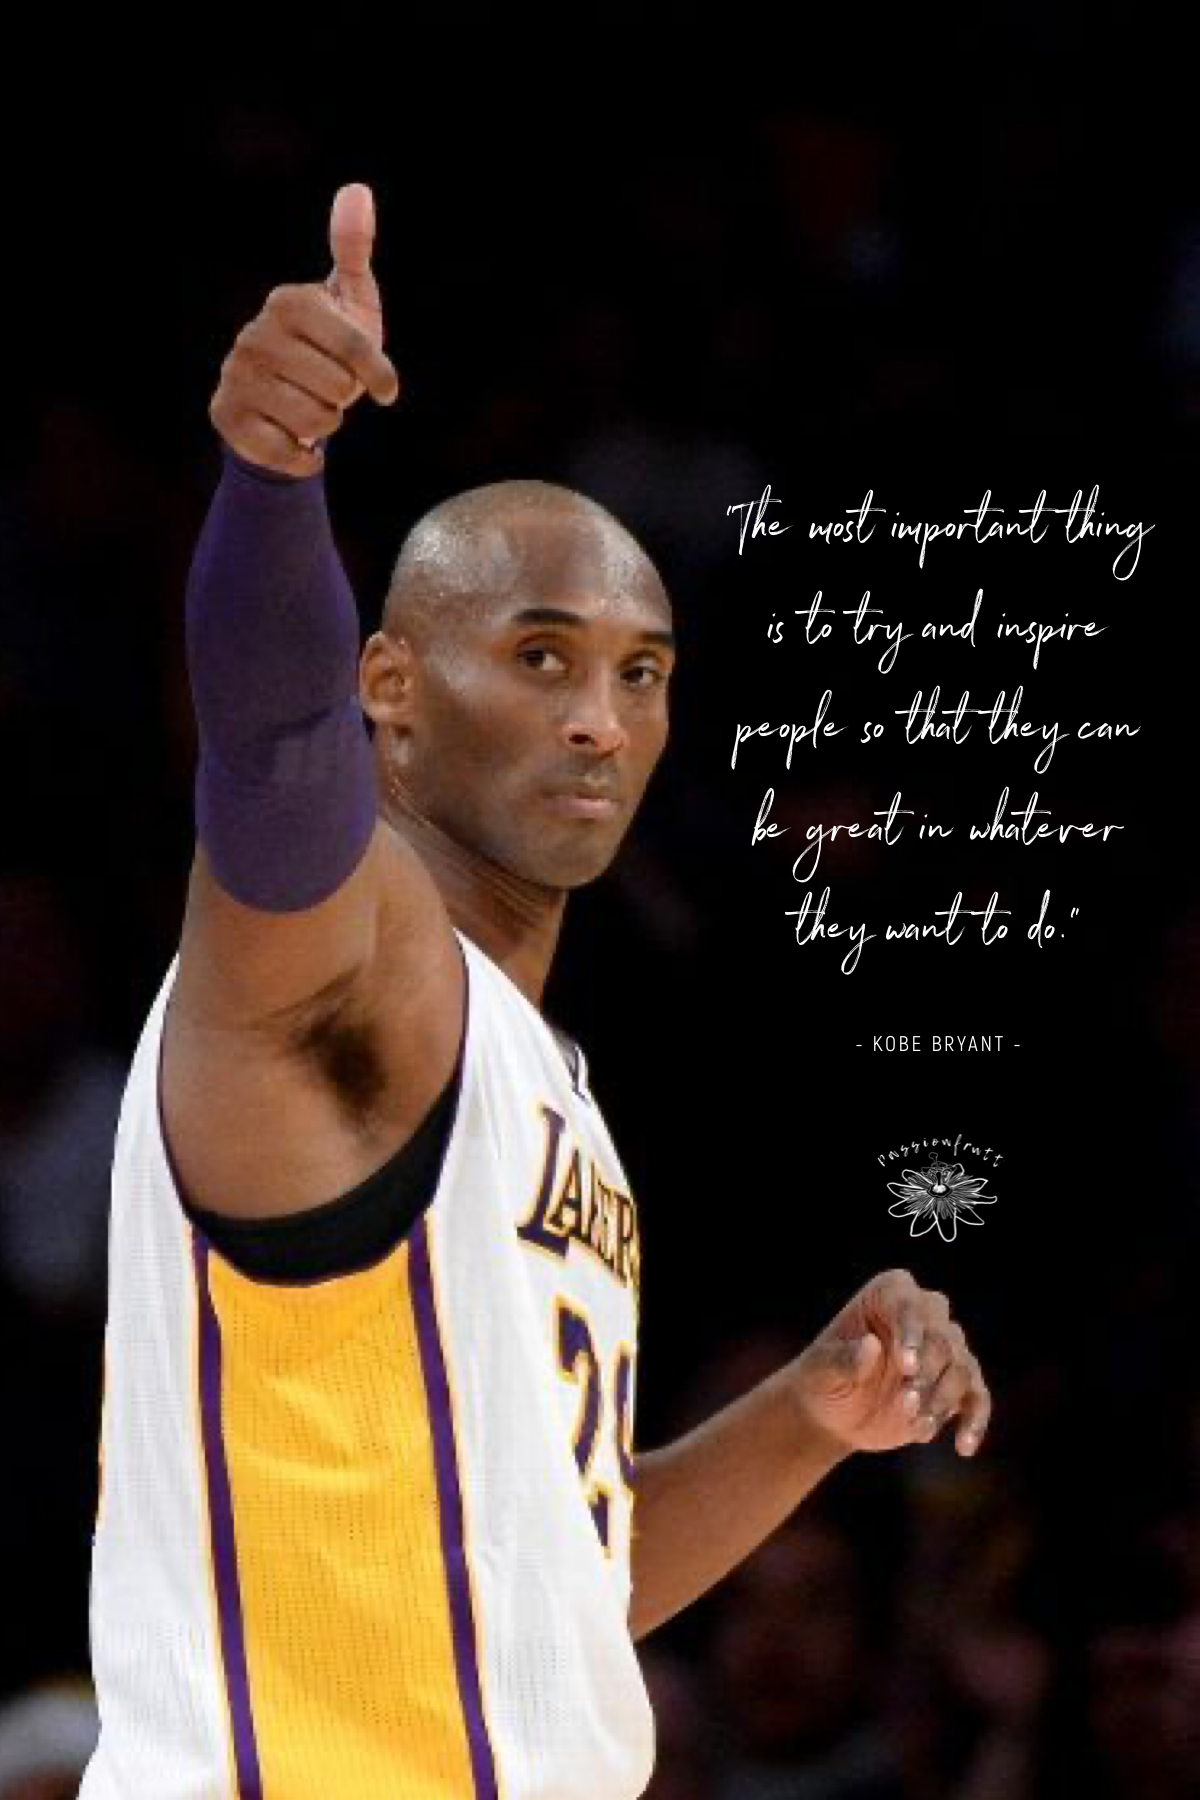 The most important thing is to try and inspire people.” Bryant. Kobe bryant quotes, Basketball quotes inspirational, Kobe bryant picture